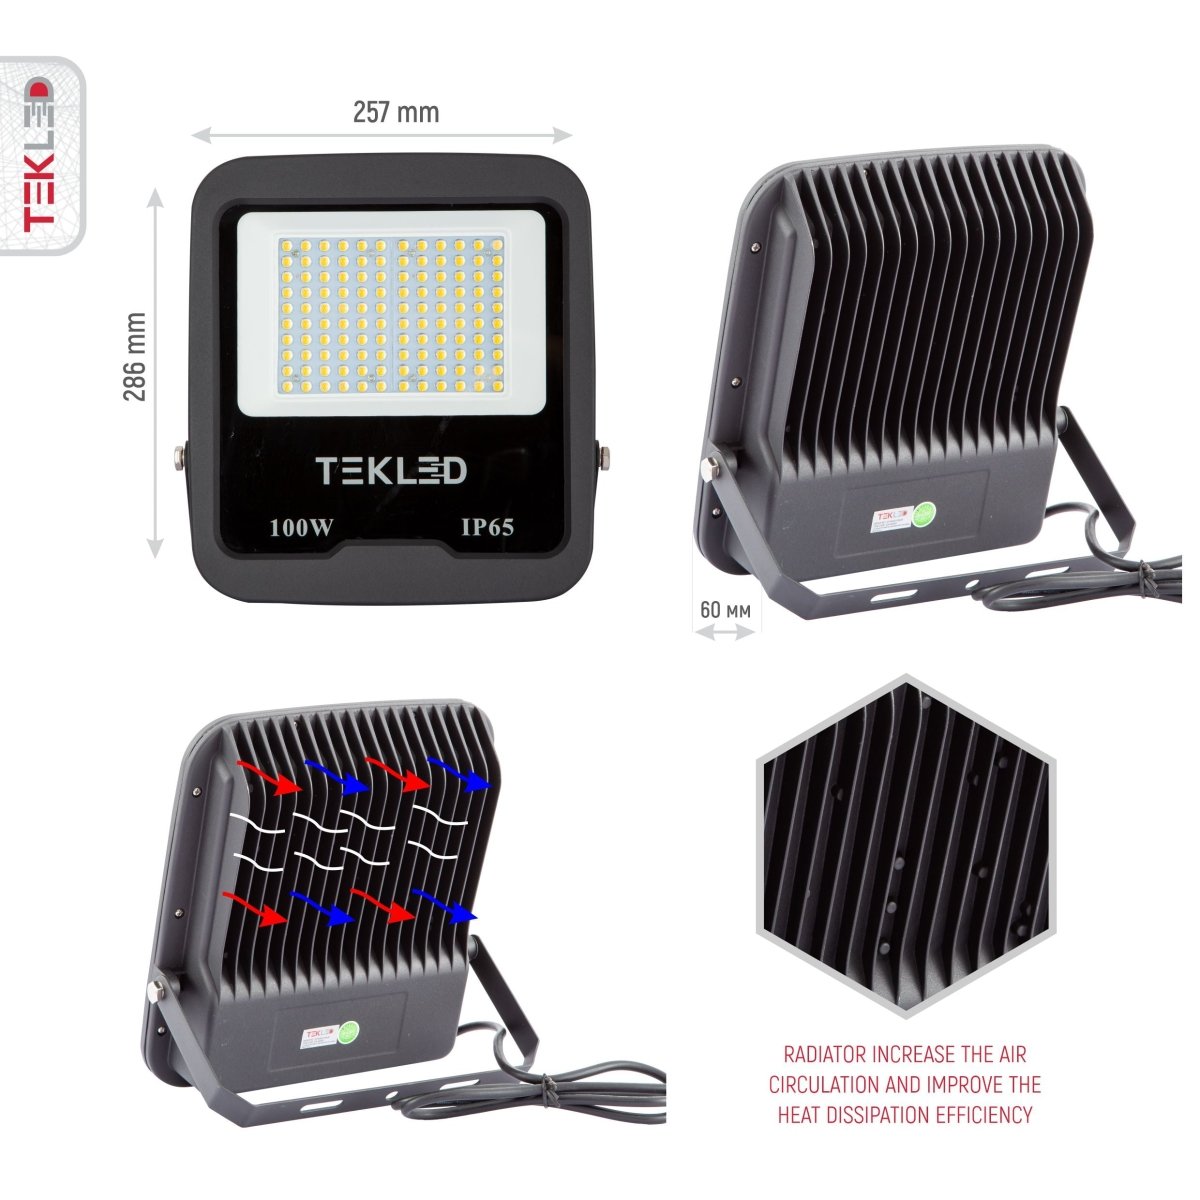 Measuremnets and closeup images for LED Floodlight SMD 3030 Uk 100W Cool White 4000K IP65